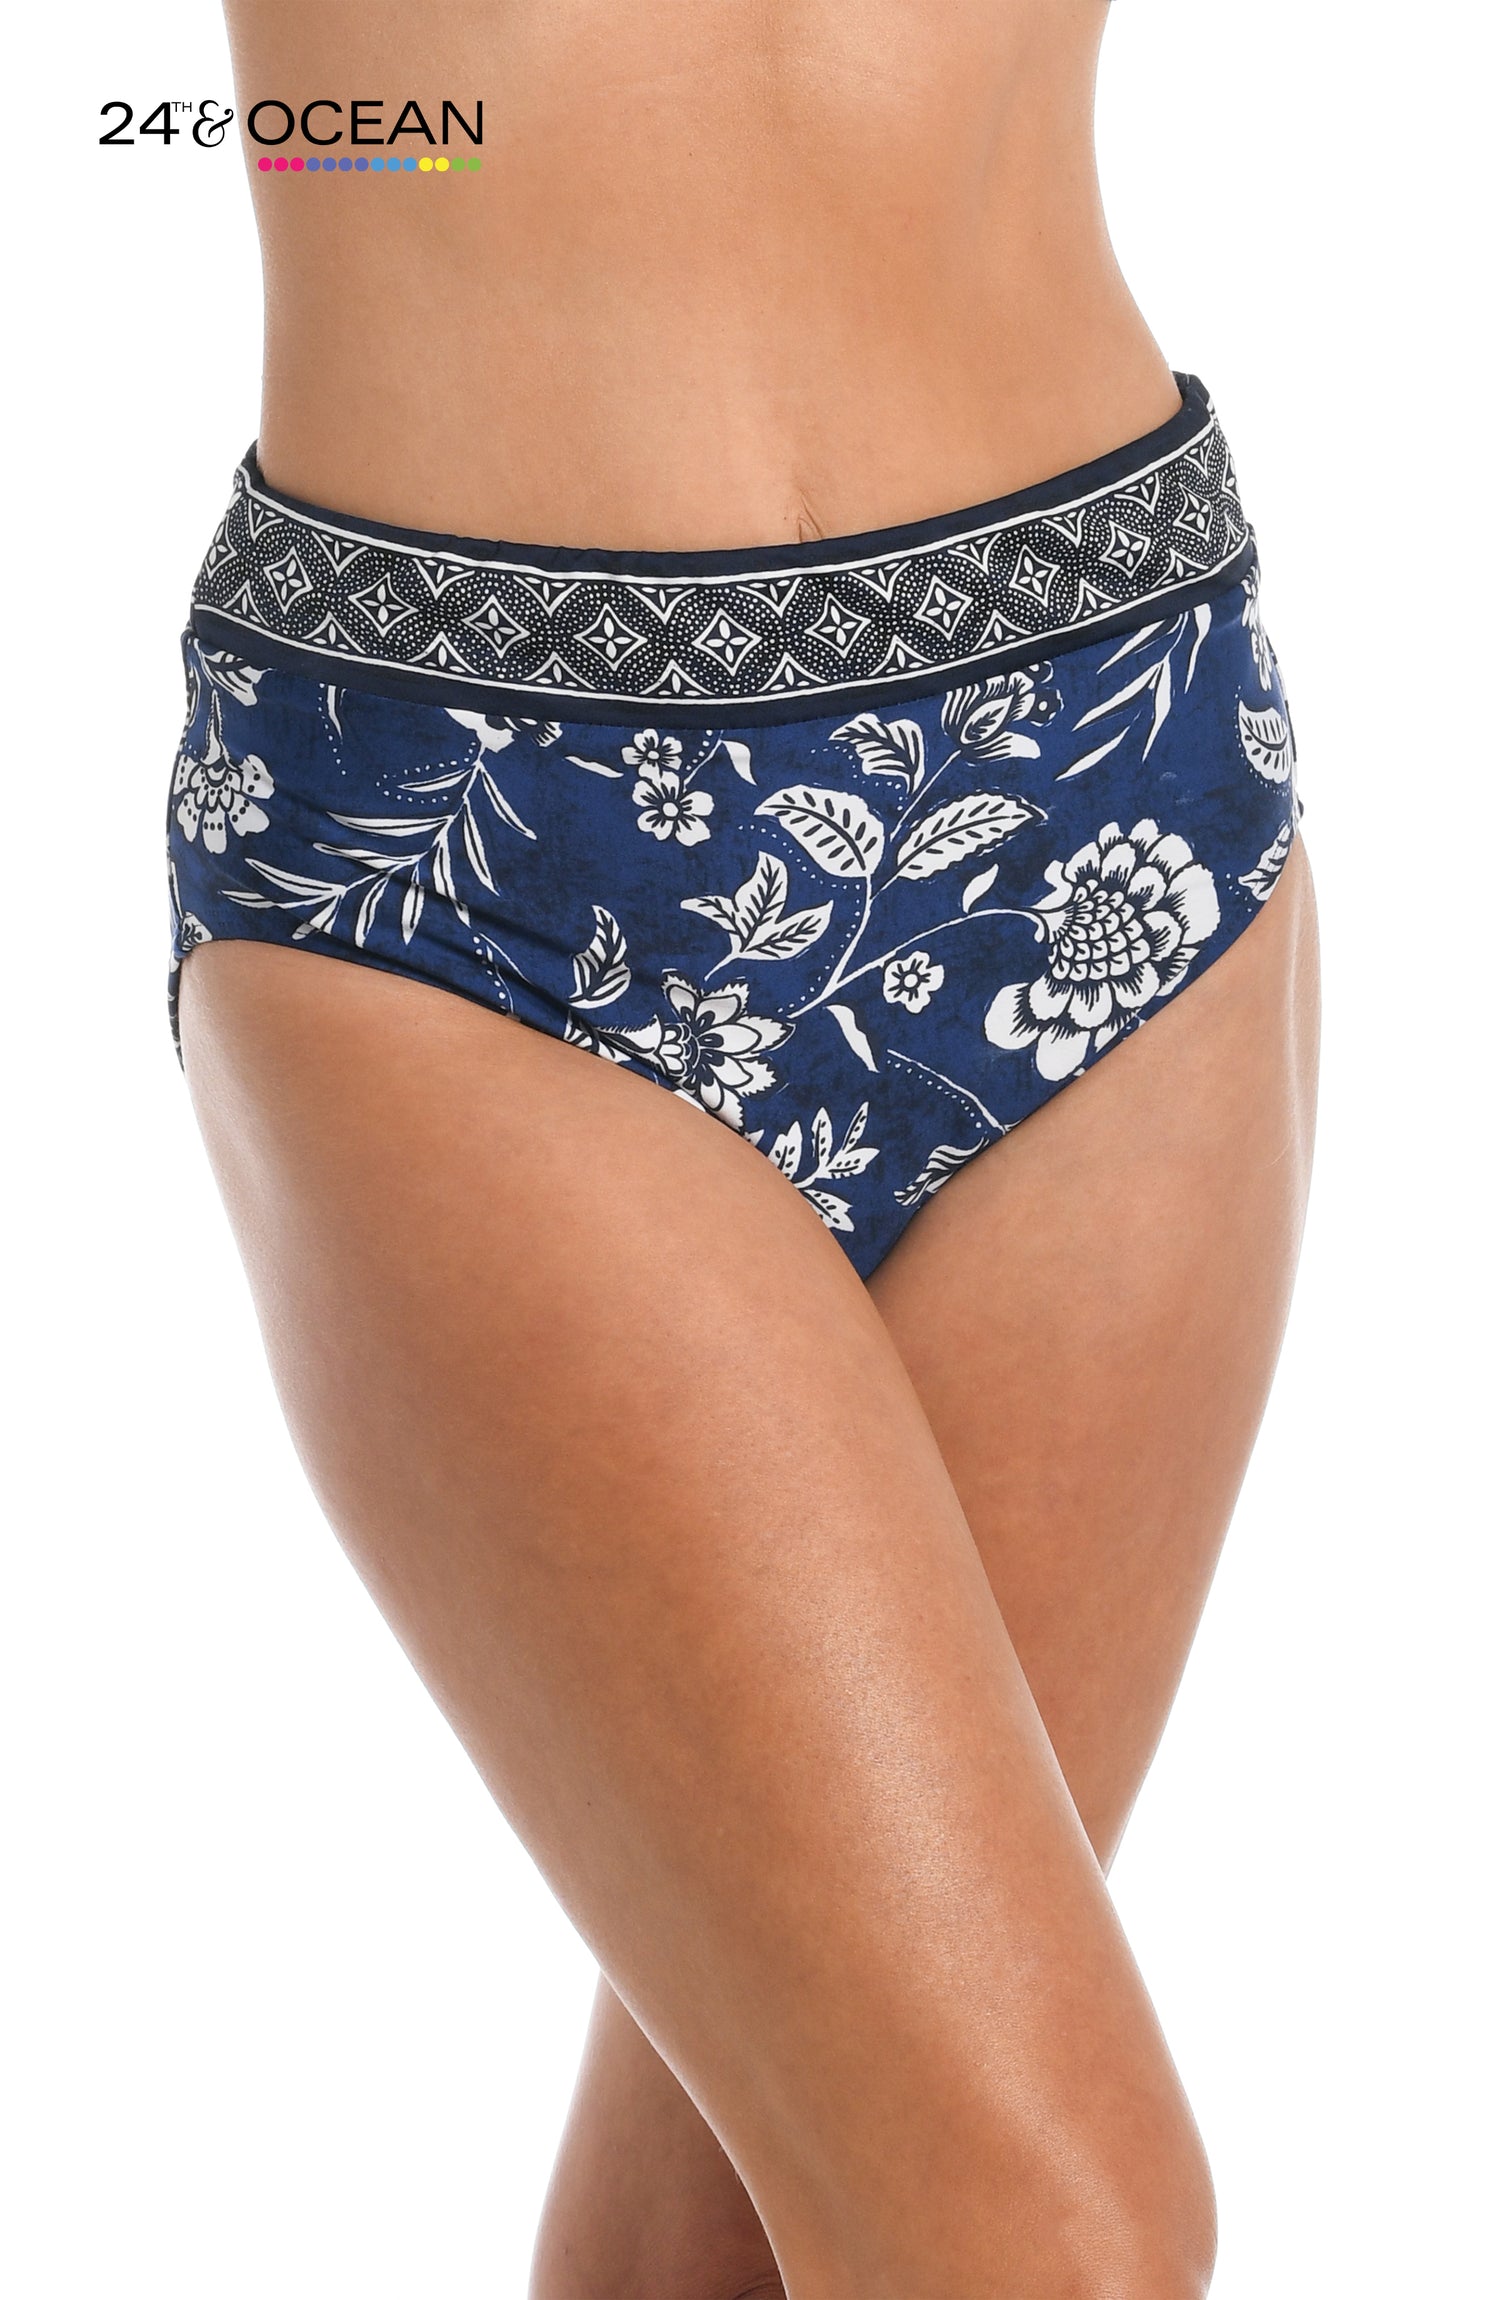 Model is wearing an indigo multi colored foral printed high waist bottom from our Bali Batik collection!